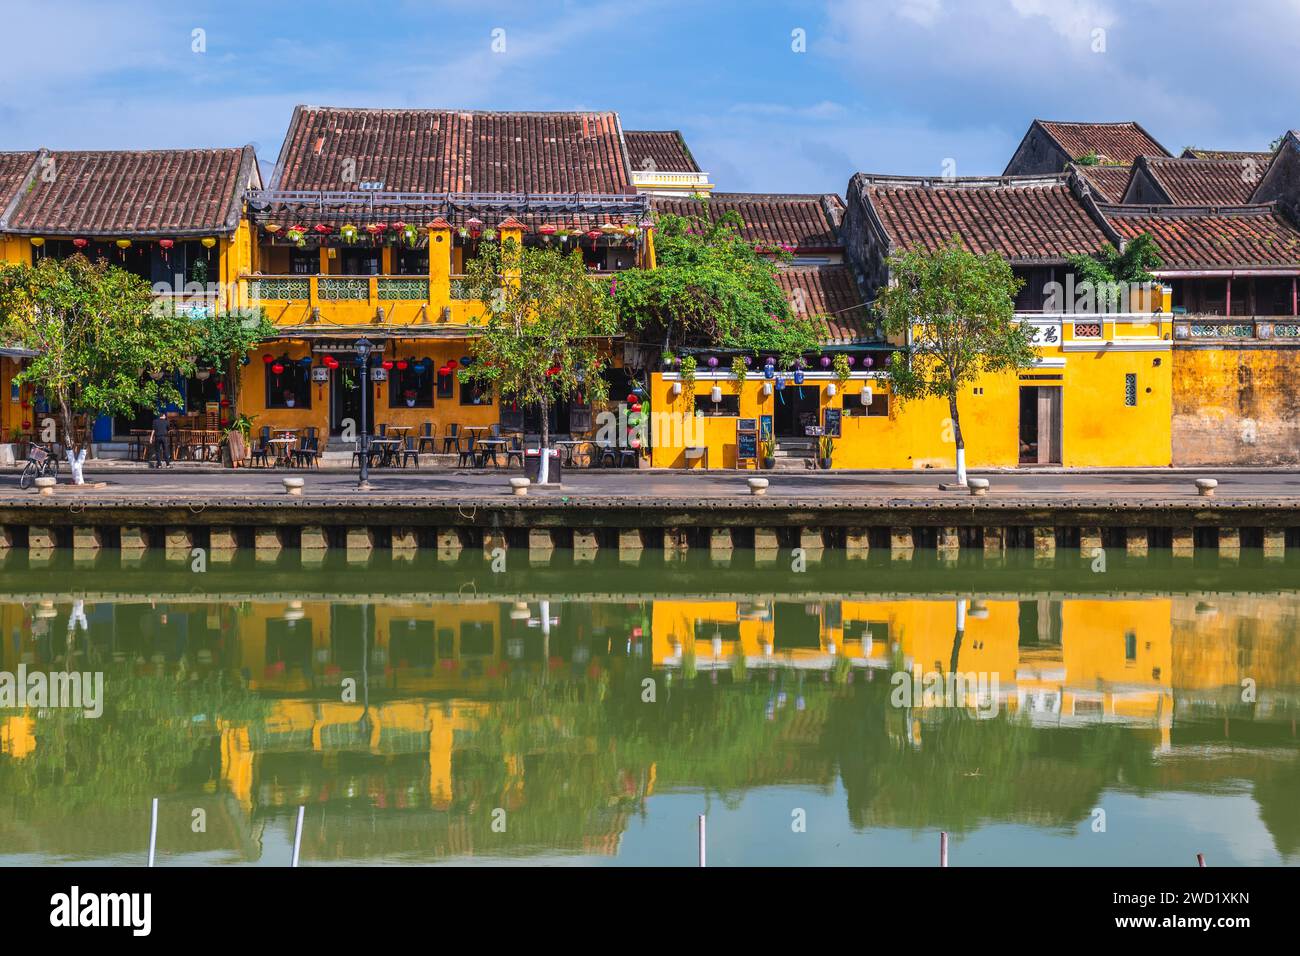 Scenery of the riverbank of Hoi An ancient town, an unesco heritage site in Vietnam Stock Photo